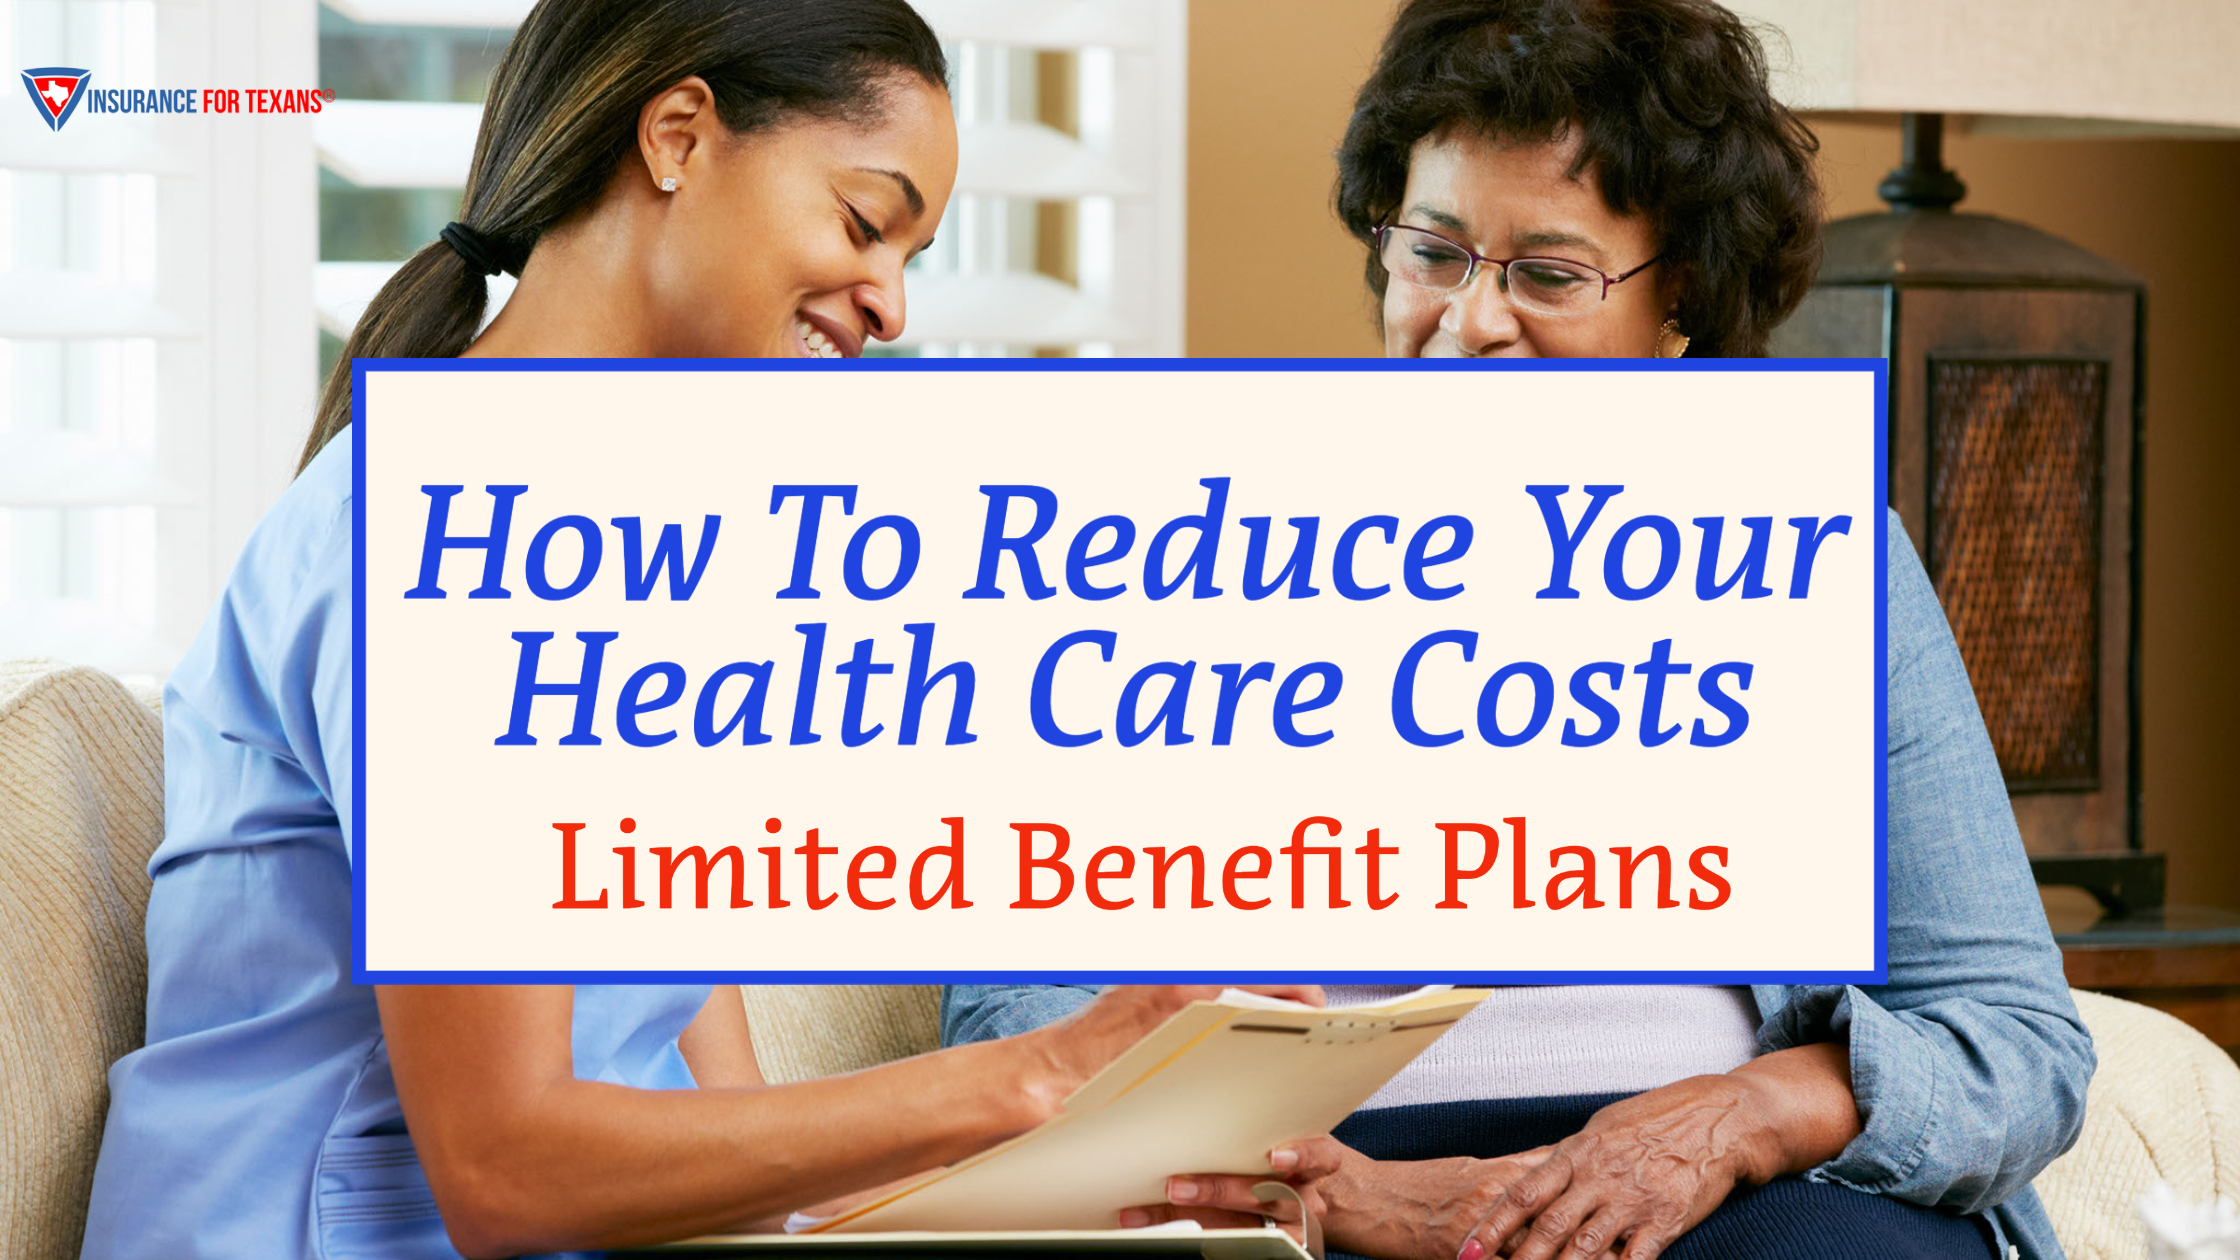 How Limited Benefit Health Plans Can Help You Reduce Your Healthcare Costs